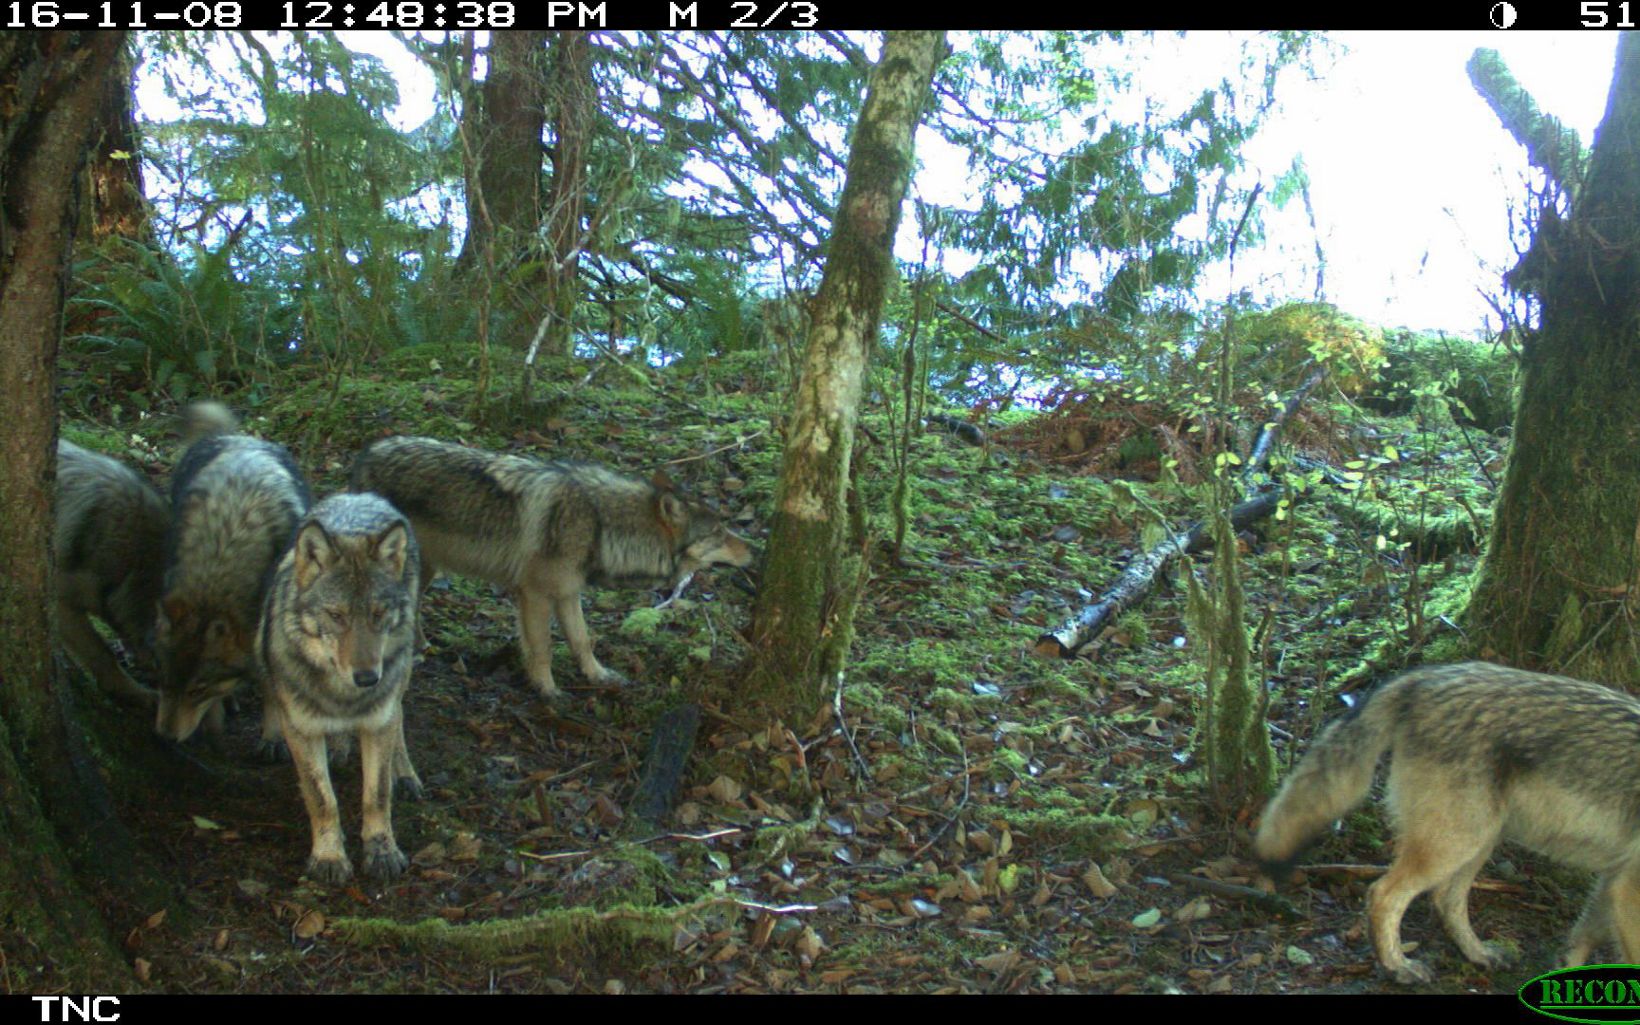 The Pack Group of wolves caught on a trail camera in the study area. © TNC